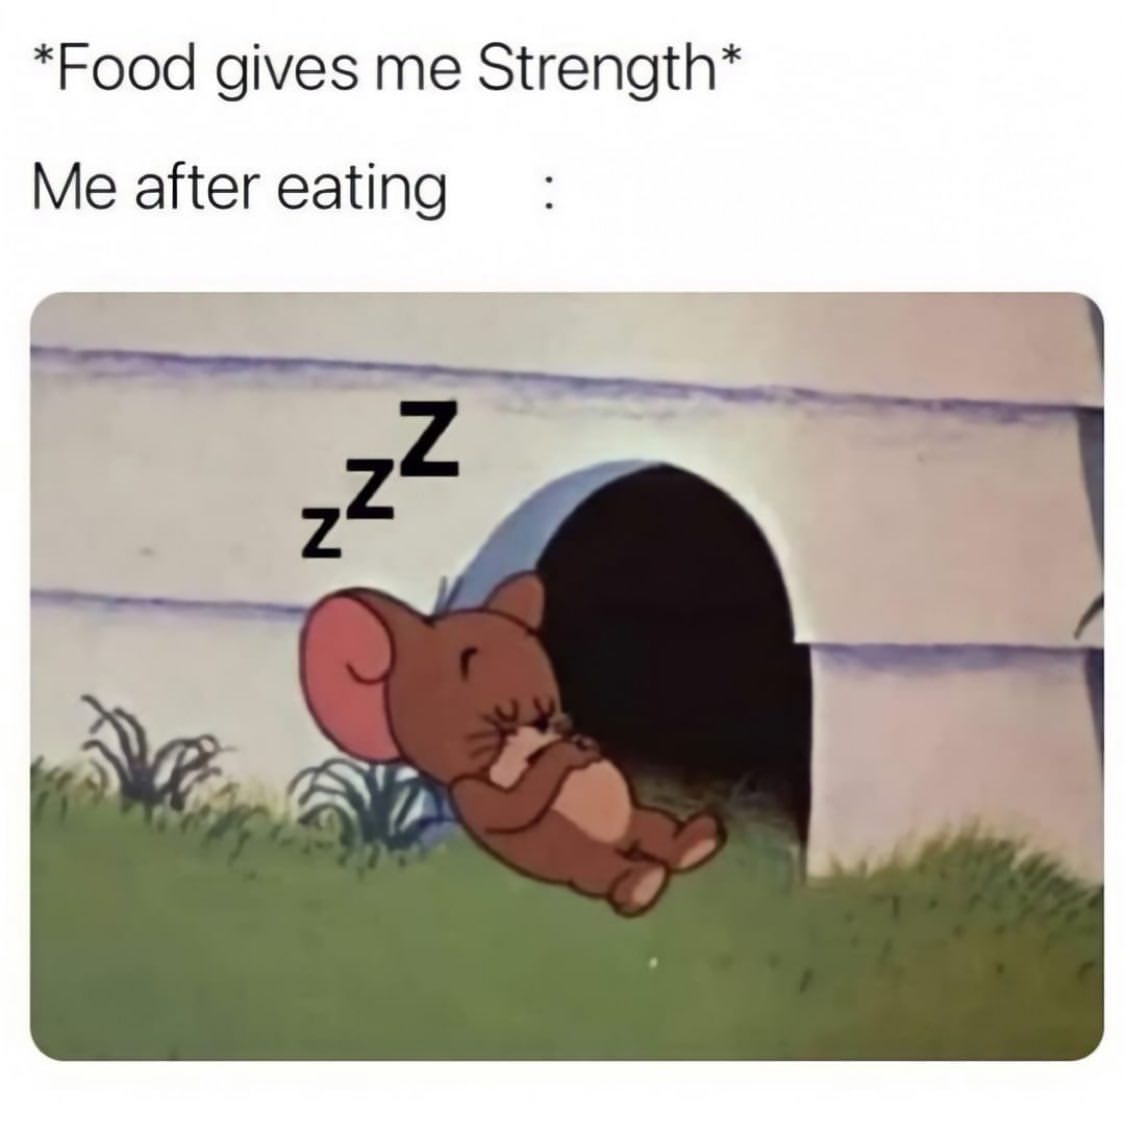 *Food gives me Strength* Me after eating.